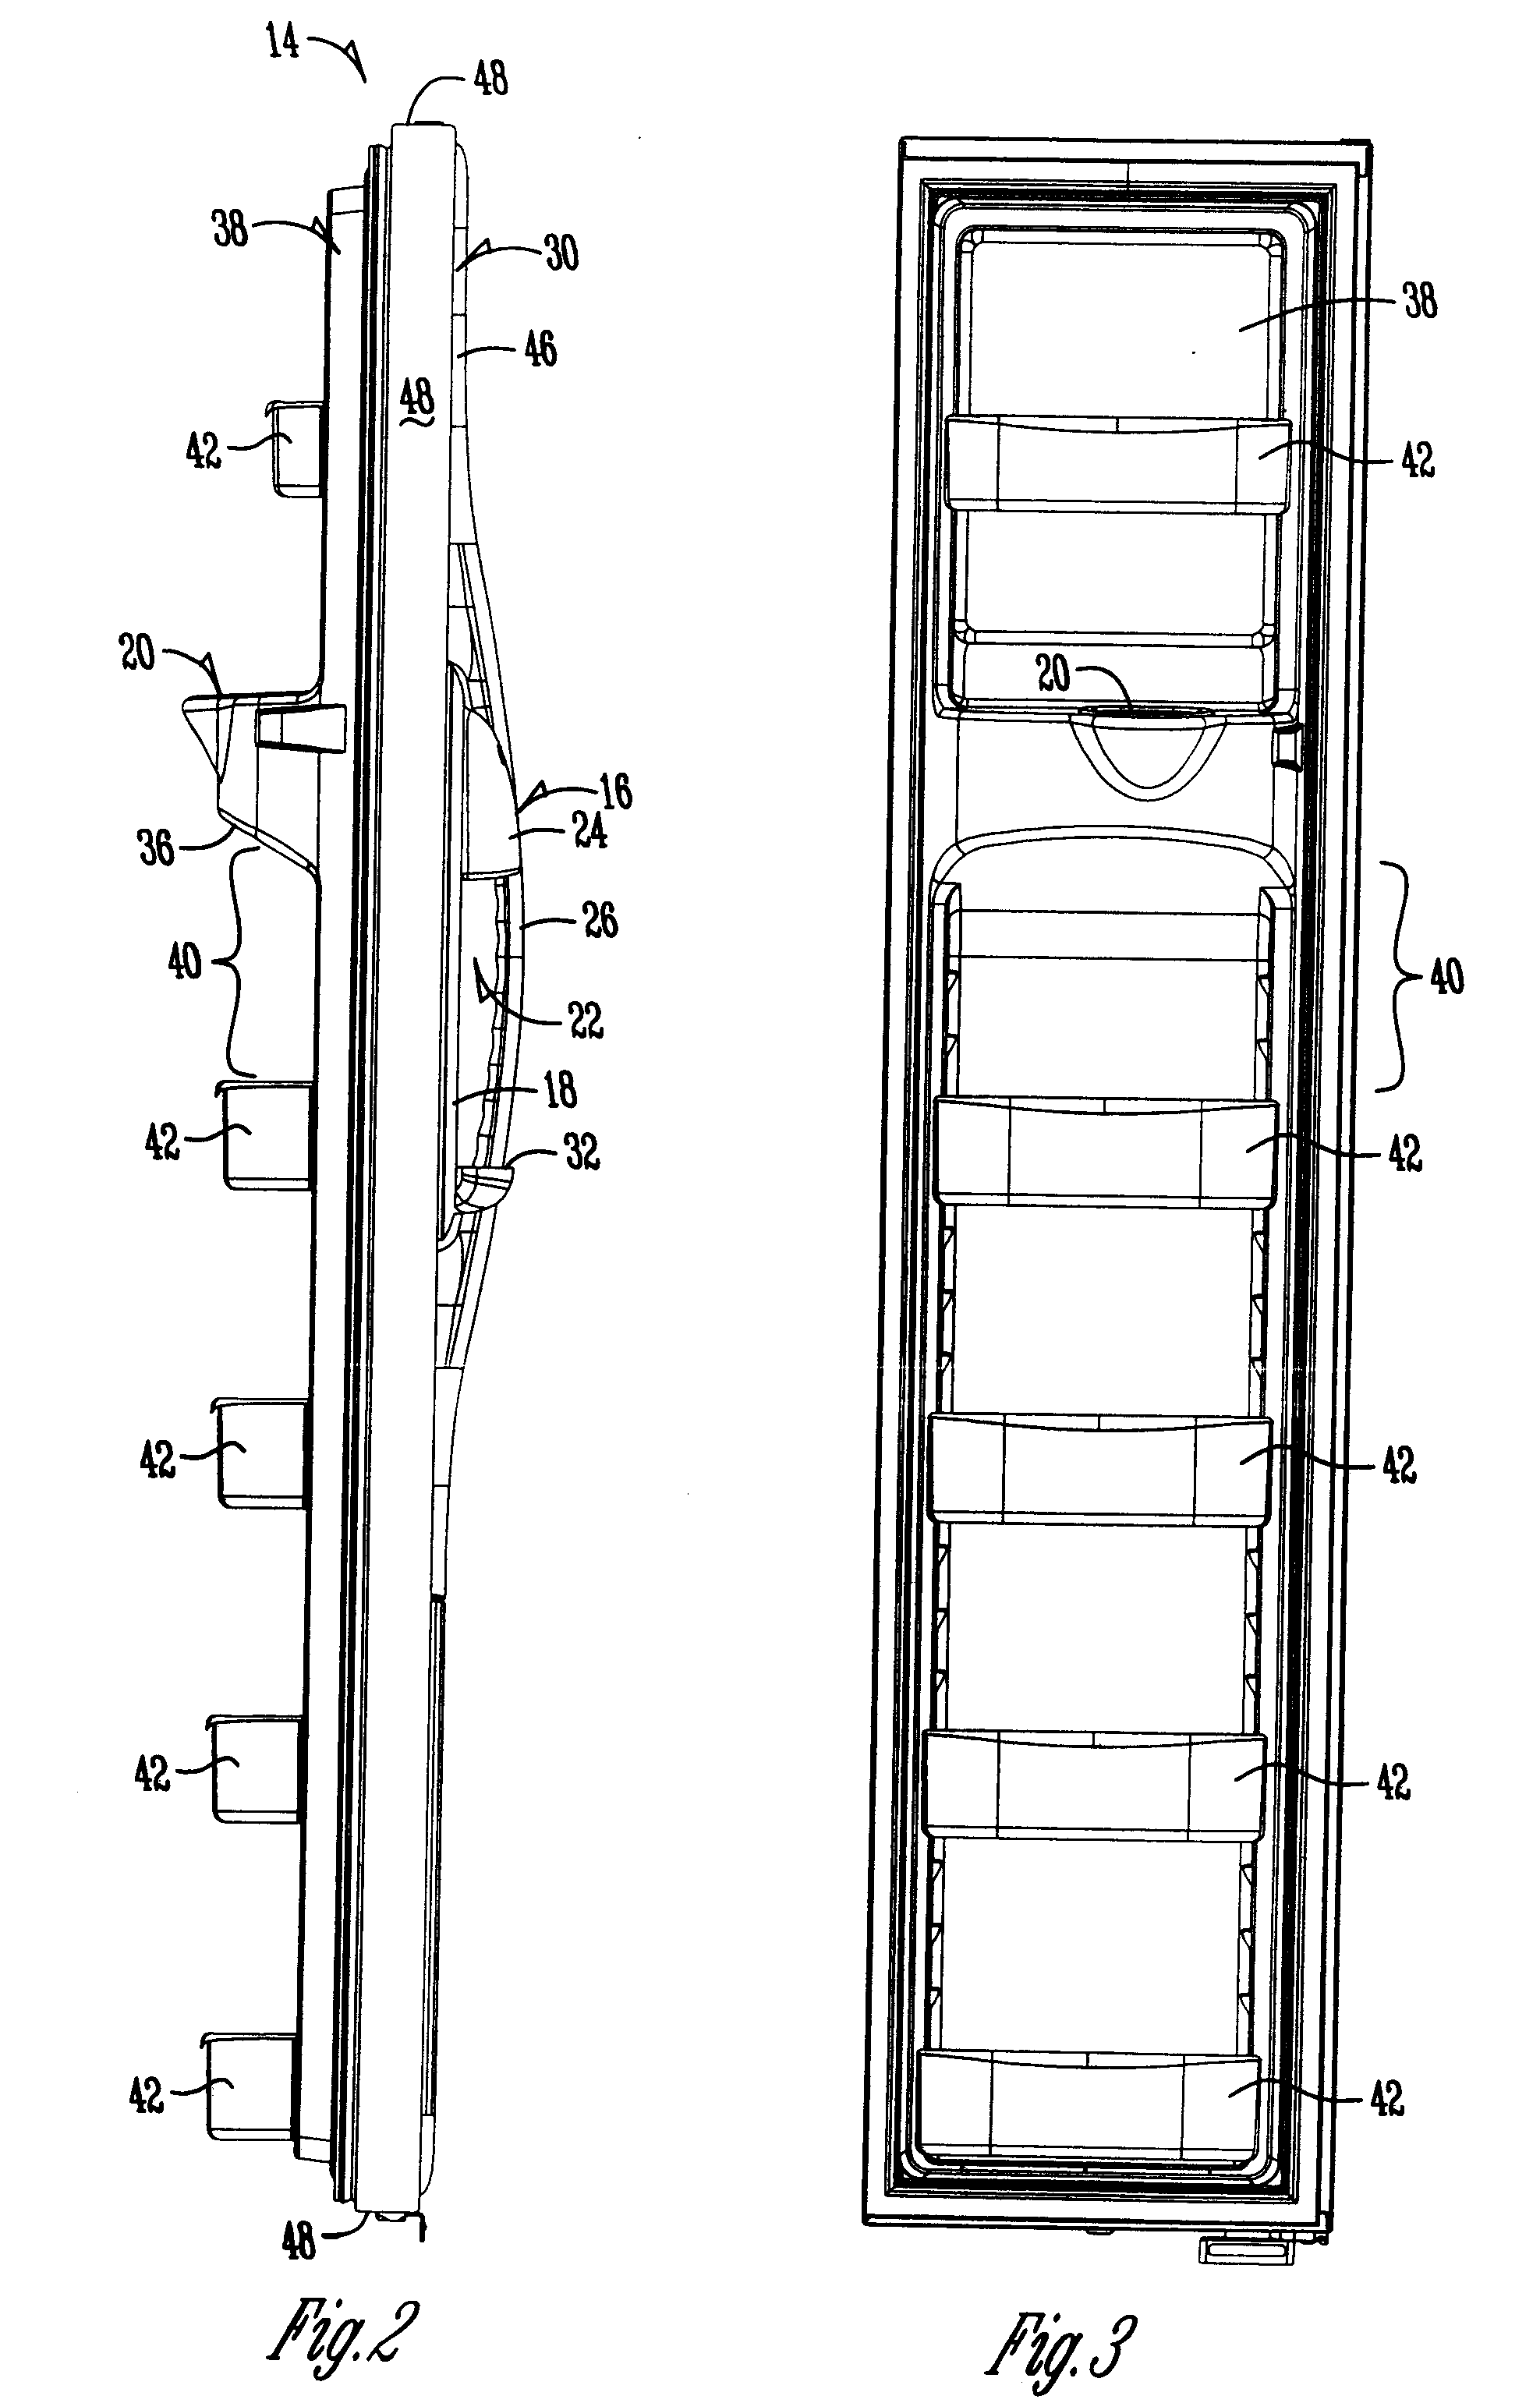 Refrigerator with a water and ice dispenser having a lighted dispenser target ring